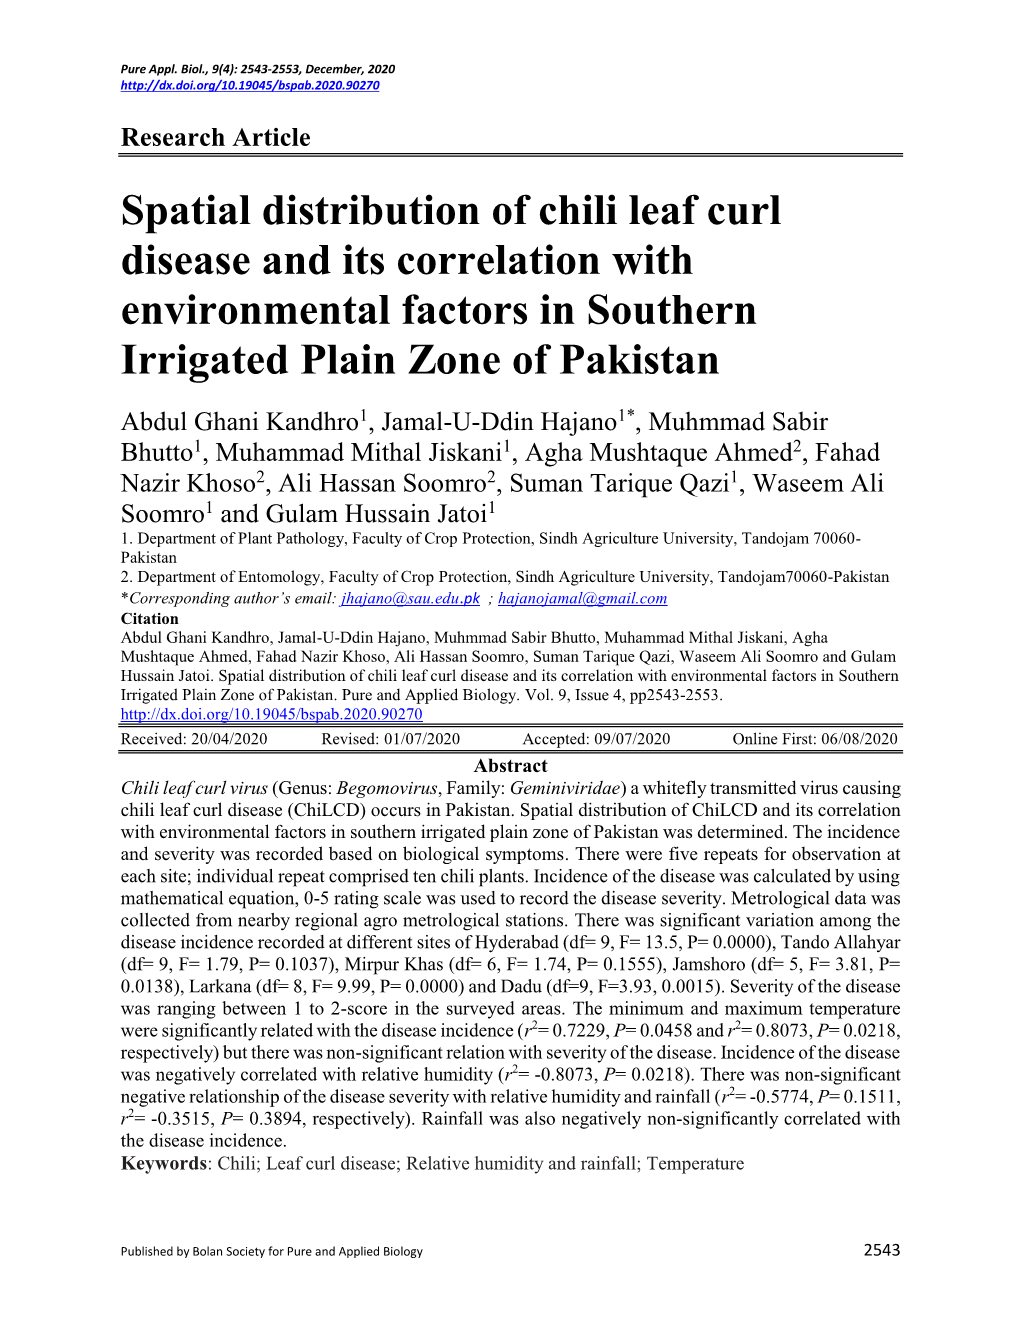 Spatial Distribution of Chili Leaf Curl Disease and Its Correlation with Environmental Factors in Southern Irrigated Plain Zone of Pakistan